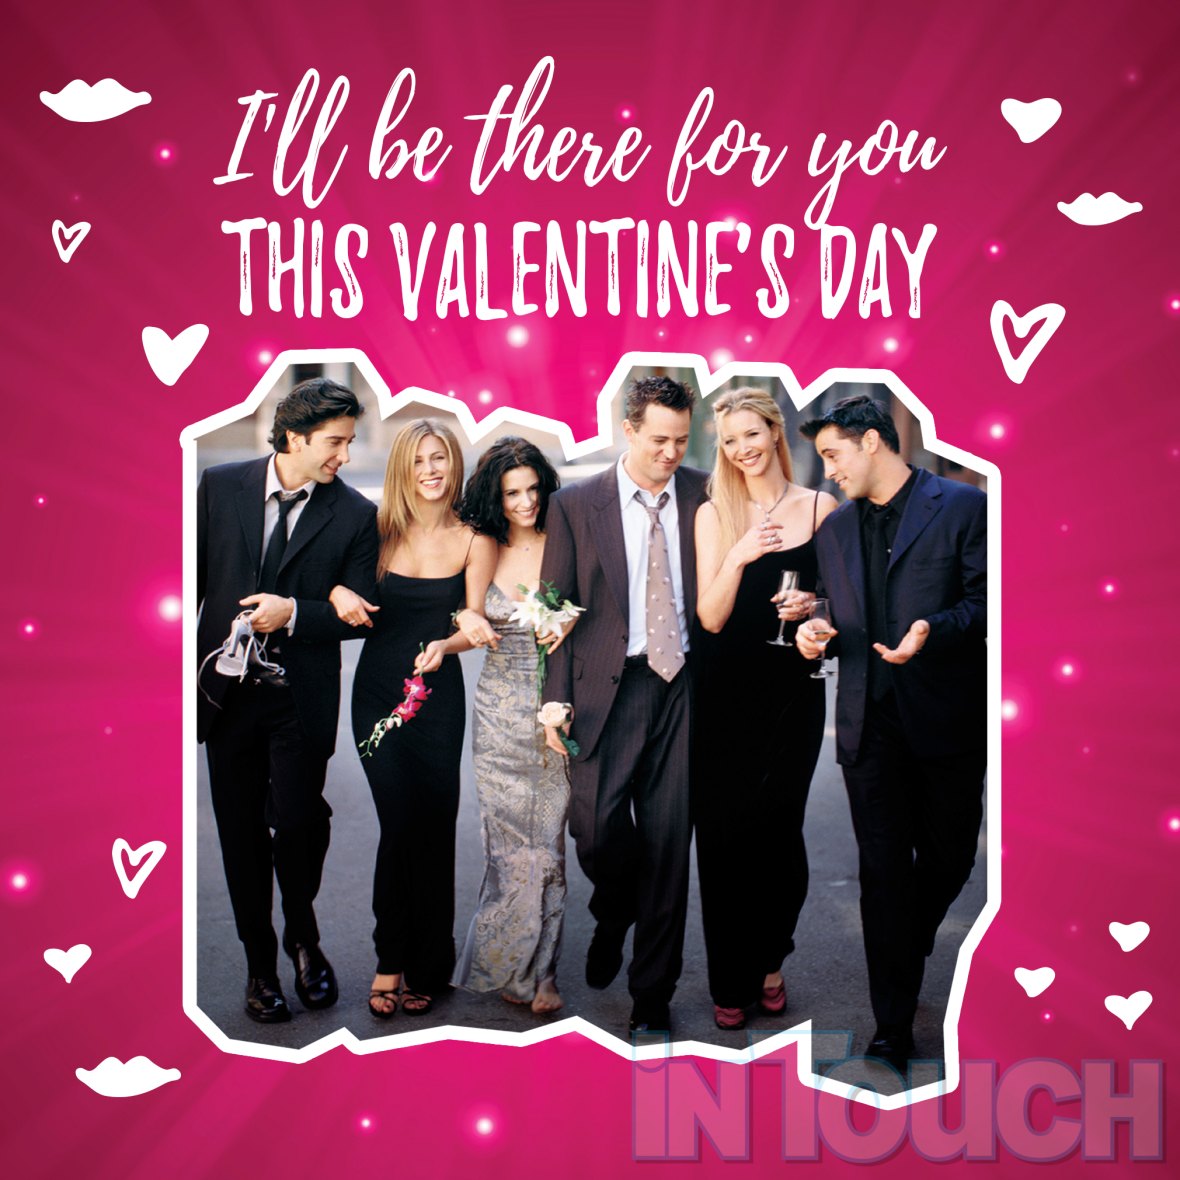 Friends TV Show Valentine's Day Cards to Send to Your Lobster